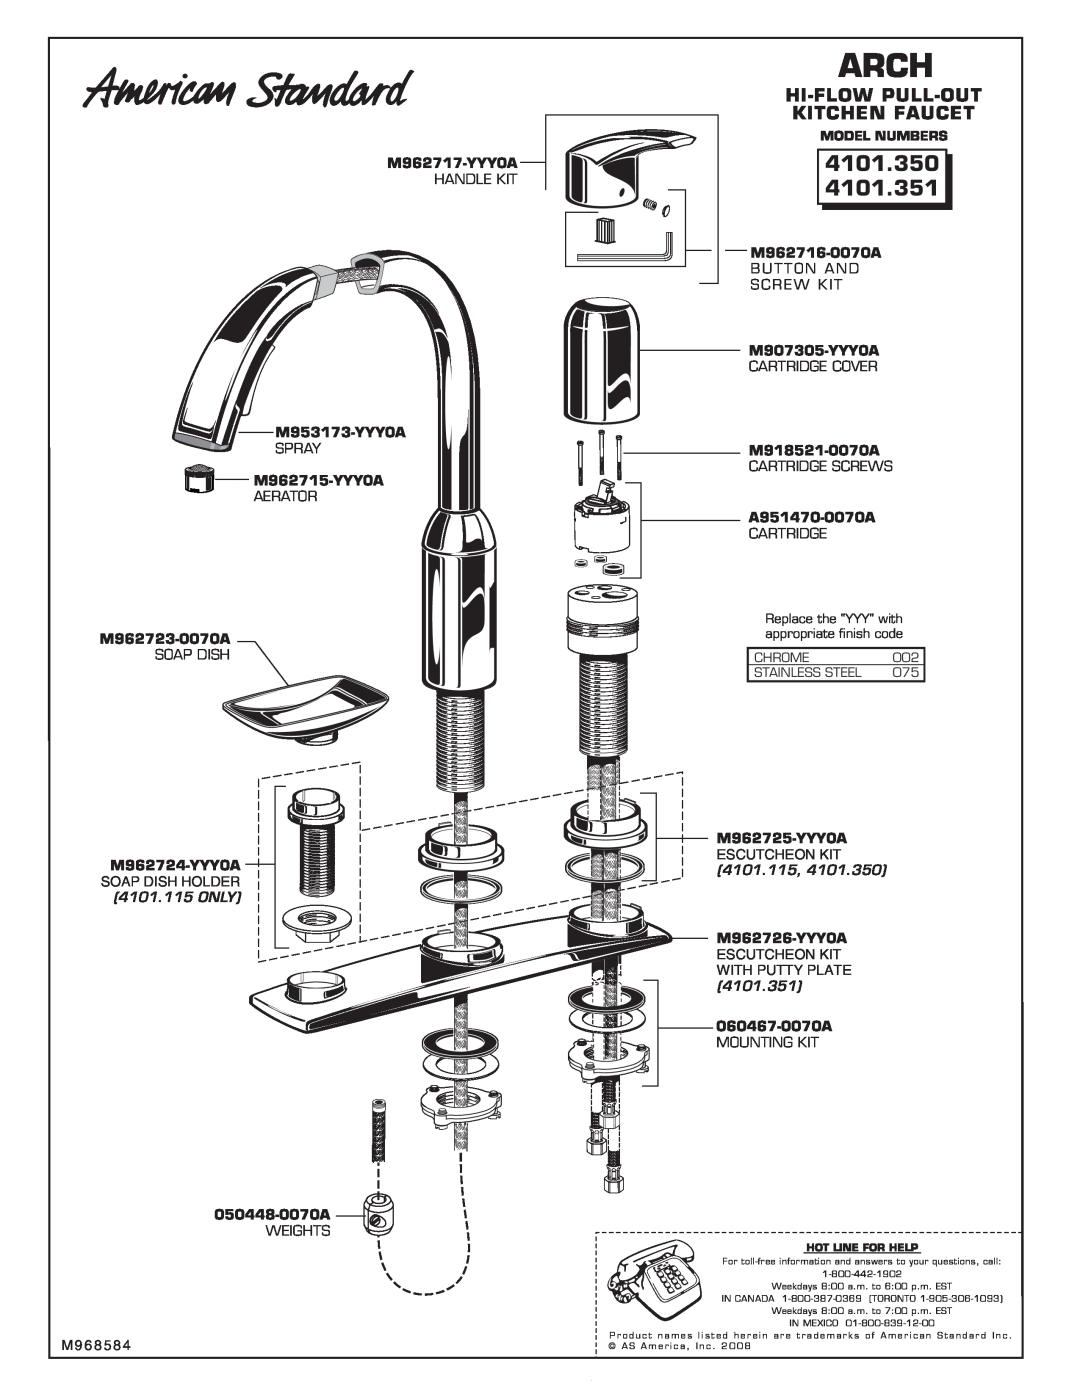 American Standard 4101.351 installation instructions Arch, 4101.350, Hi-Flow Pull-Out, Kitchen Faucet 